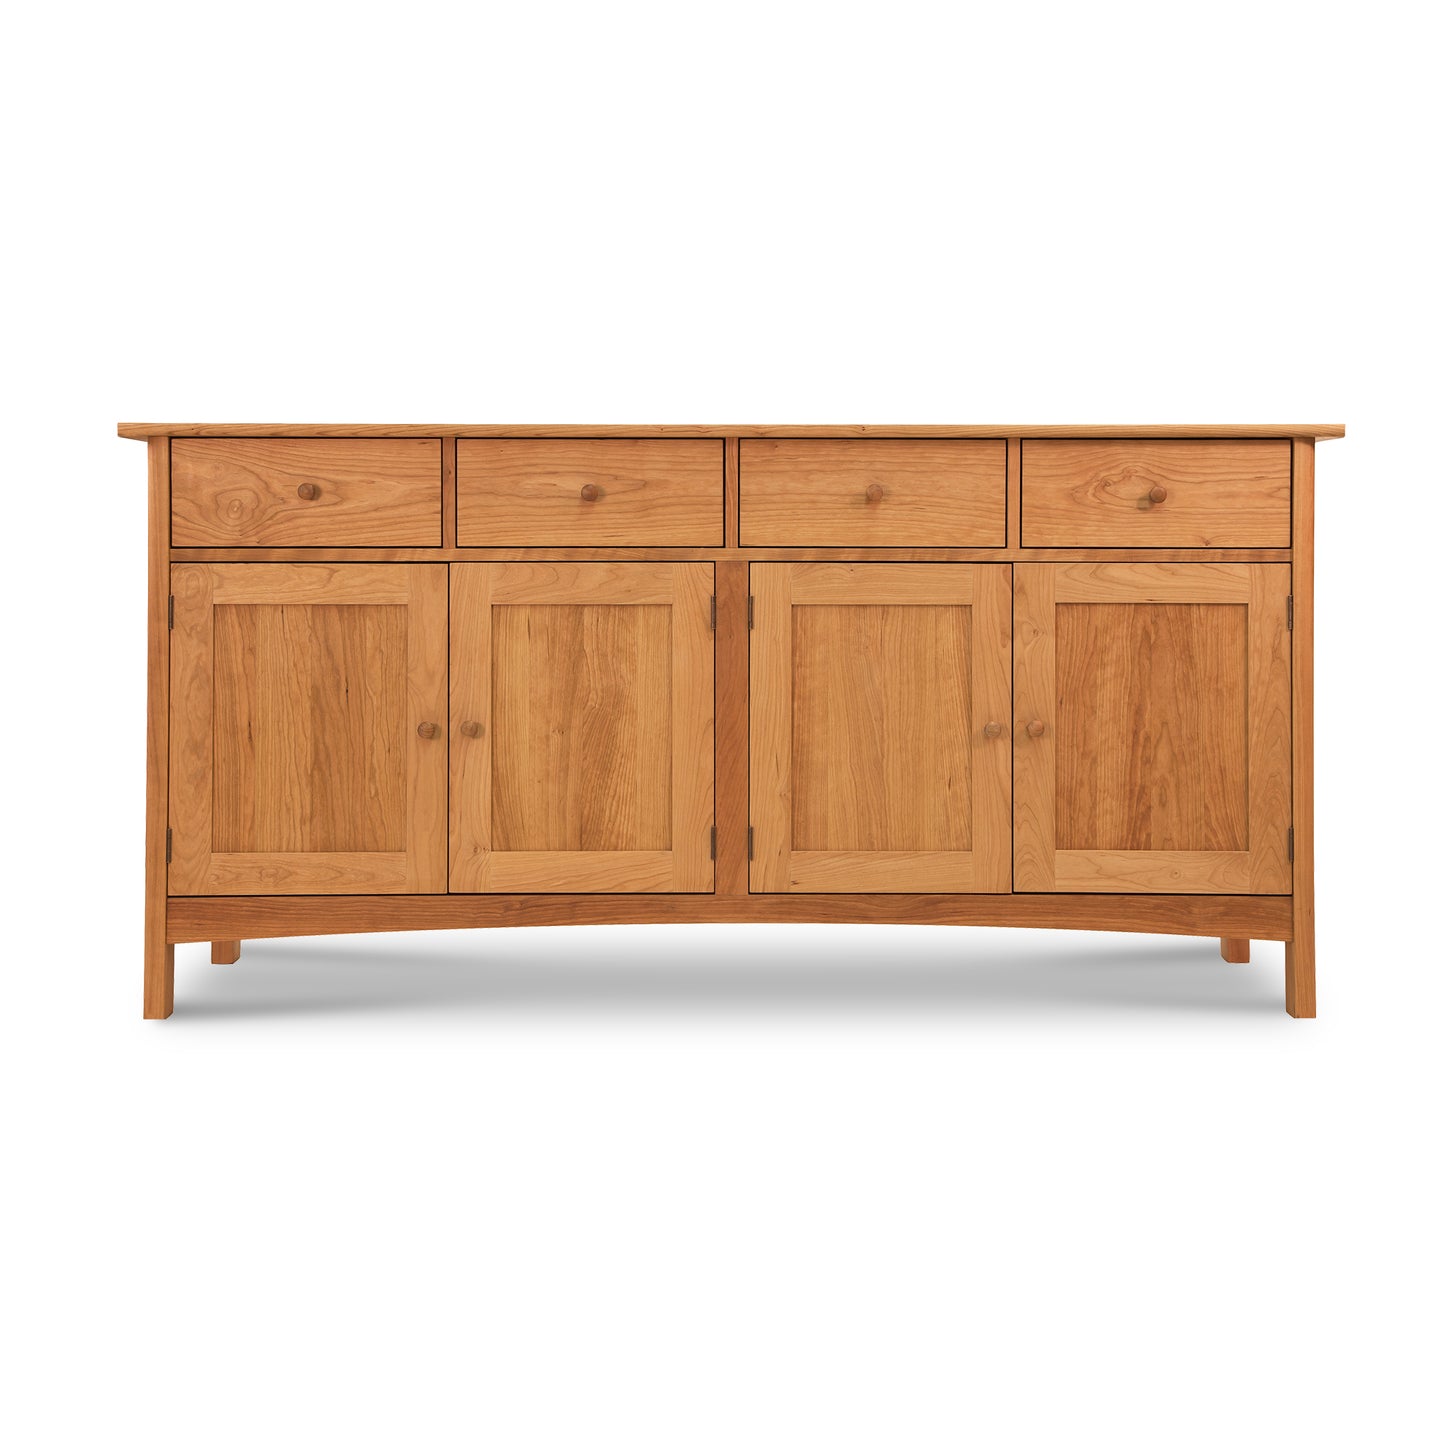 Vermont Furniture Designs Burlington Shaker Long Sideboard, made of solid wood, with three drawers and three cabinet doors, isolated on a white background.